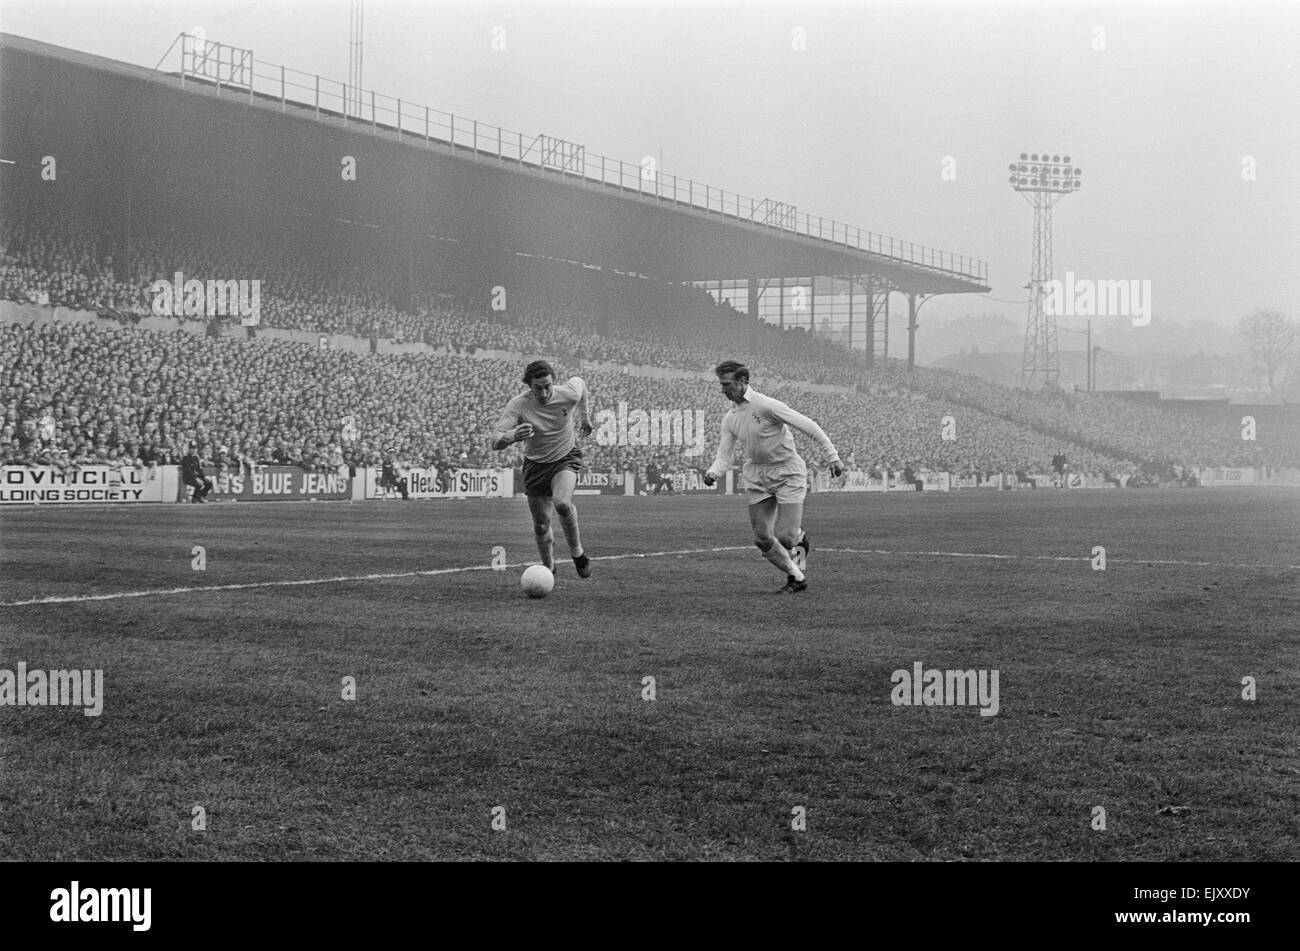 FA Cup Quarter Final match at Elland Road. Leeds United 2 v Tottenham Hotspur 1. Spurs Martin Chivers on the ball watched by defender Jack Charlton. 18th March 1972. Stock Photo